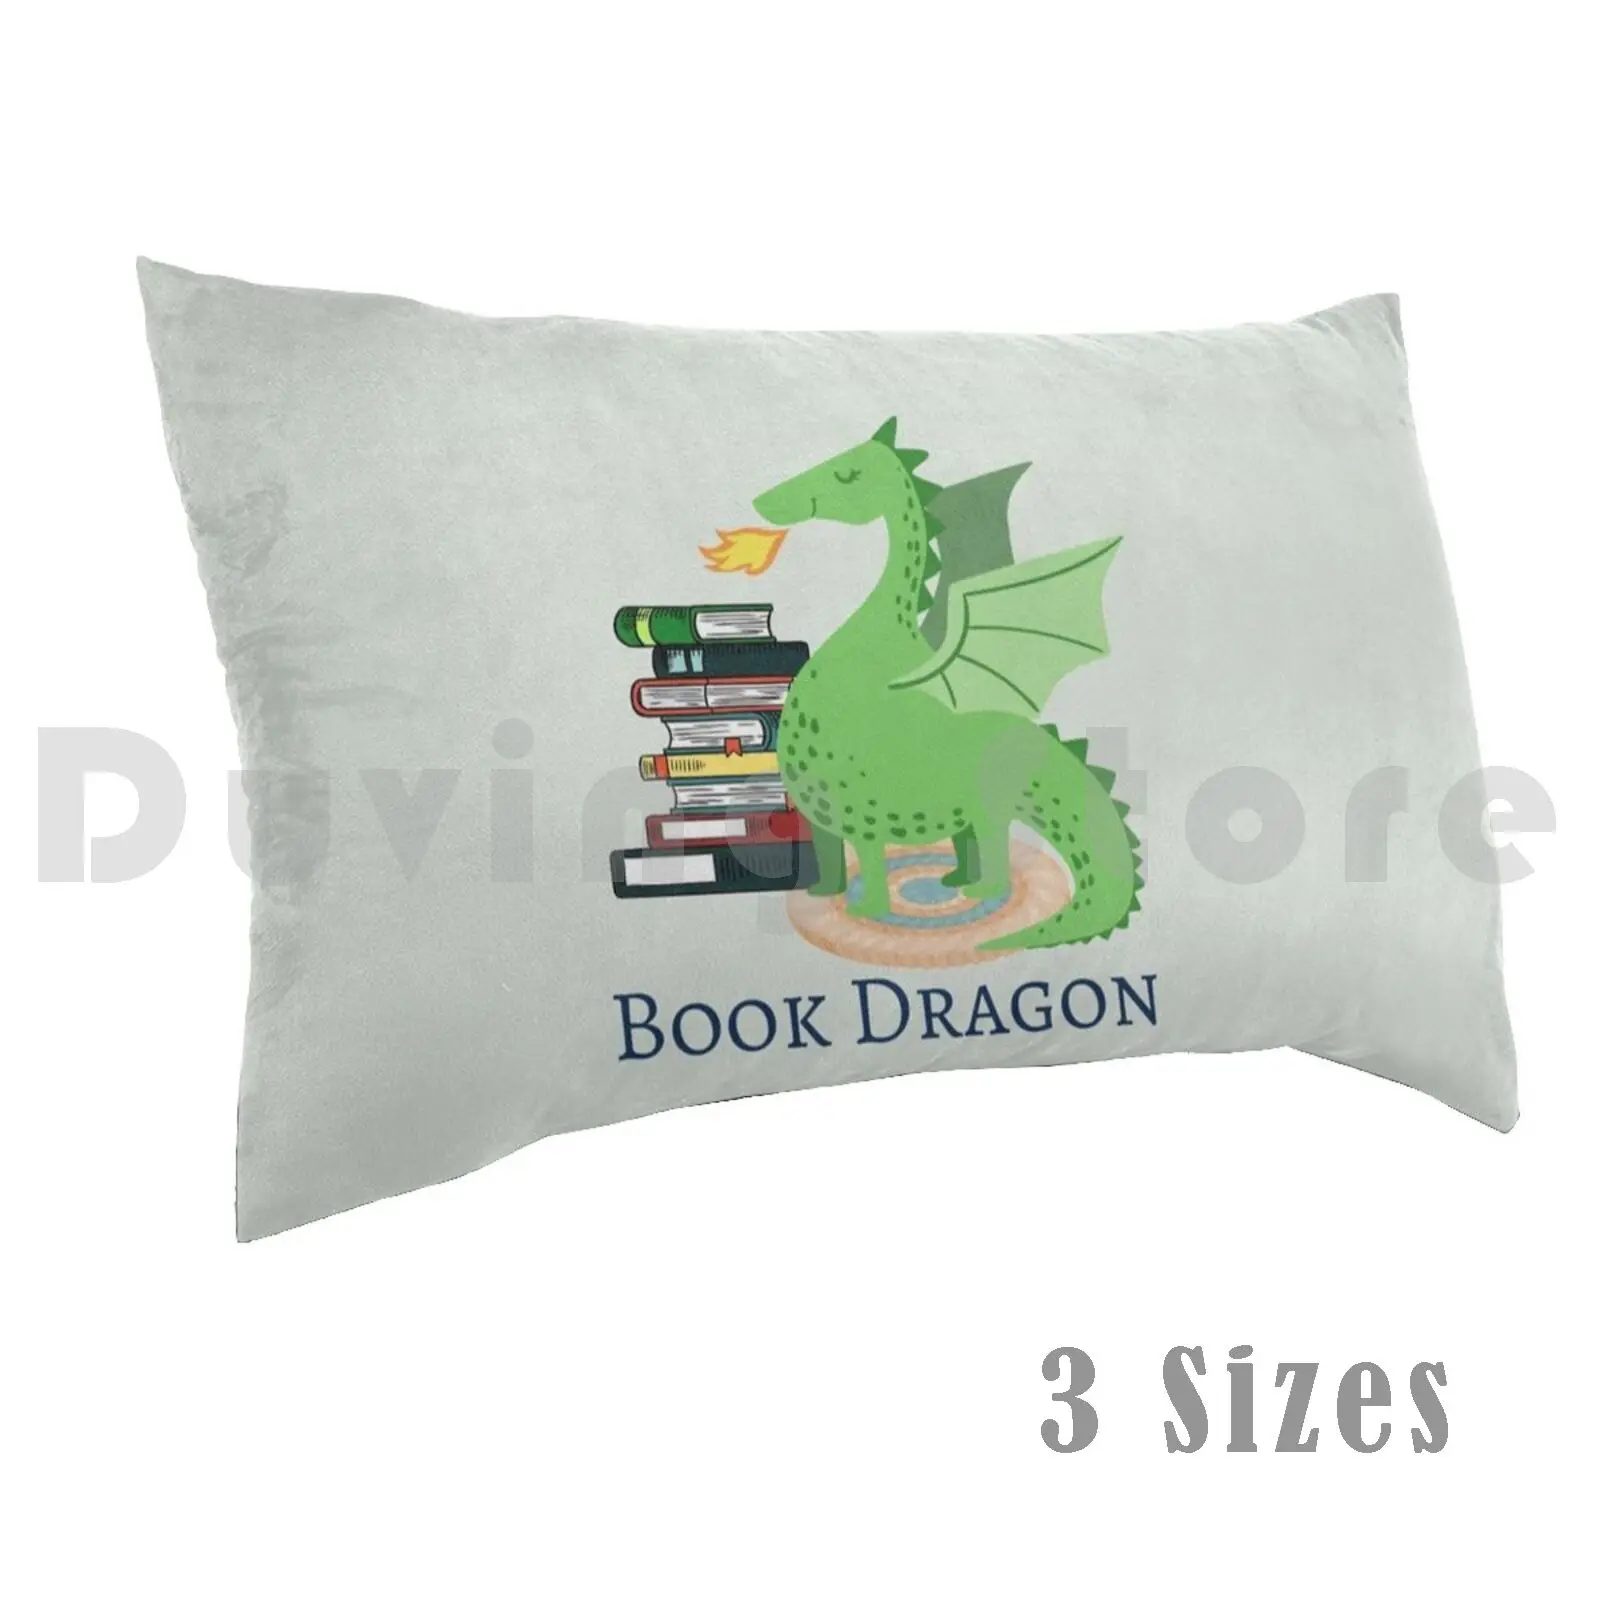 Dragon , Not Worm Pillow Case 20x30 inch Smug Books Bookish Dragon Hoard Hoarder Read Reader Reading